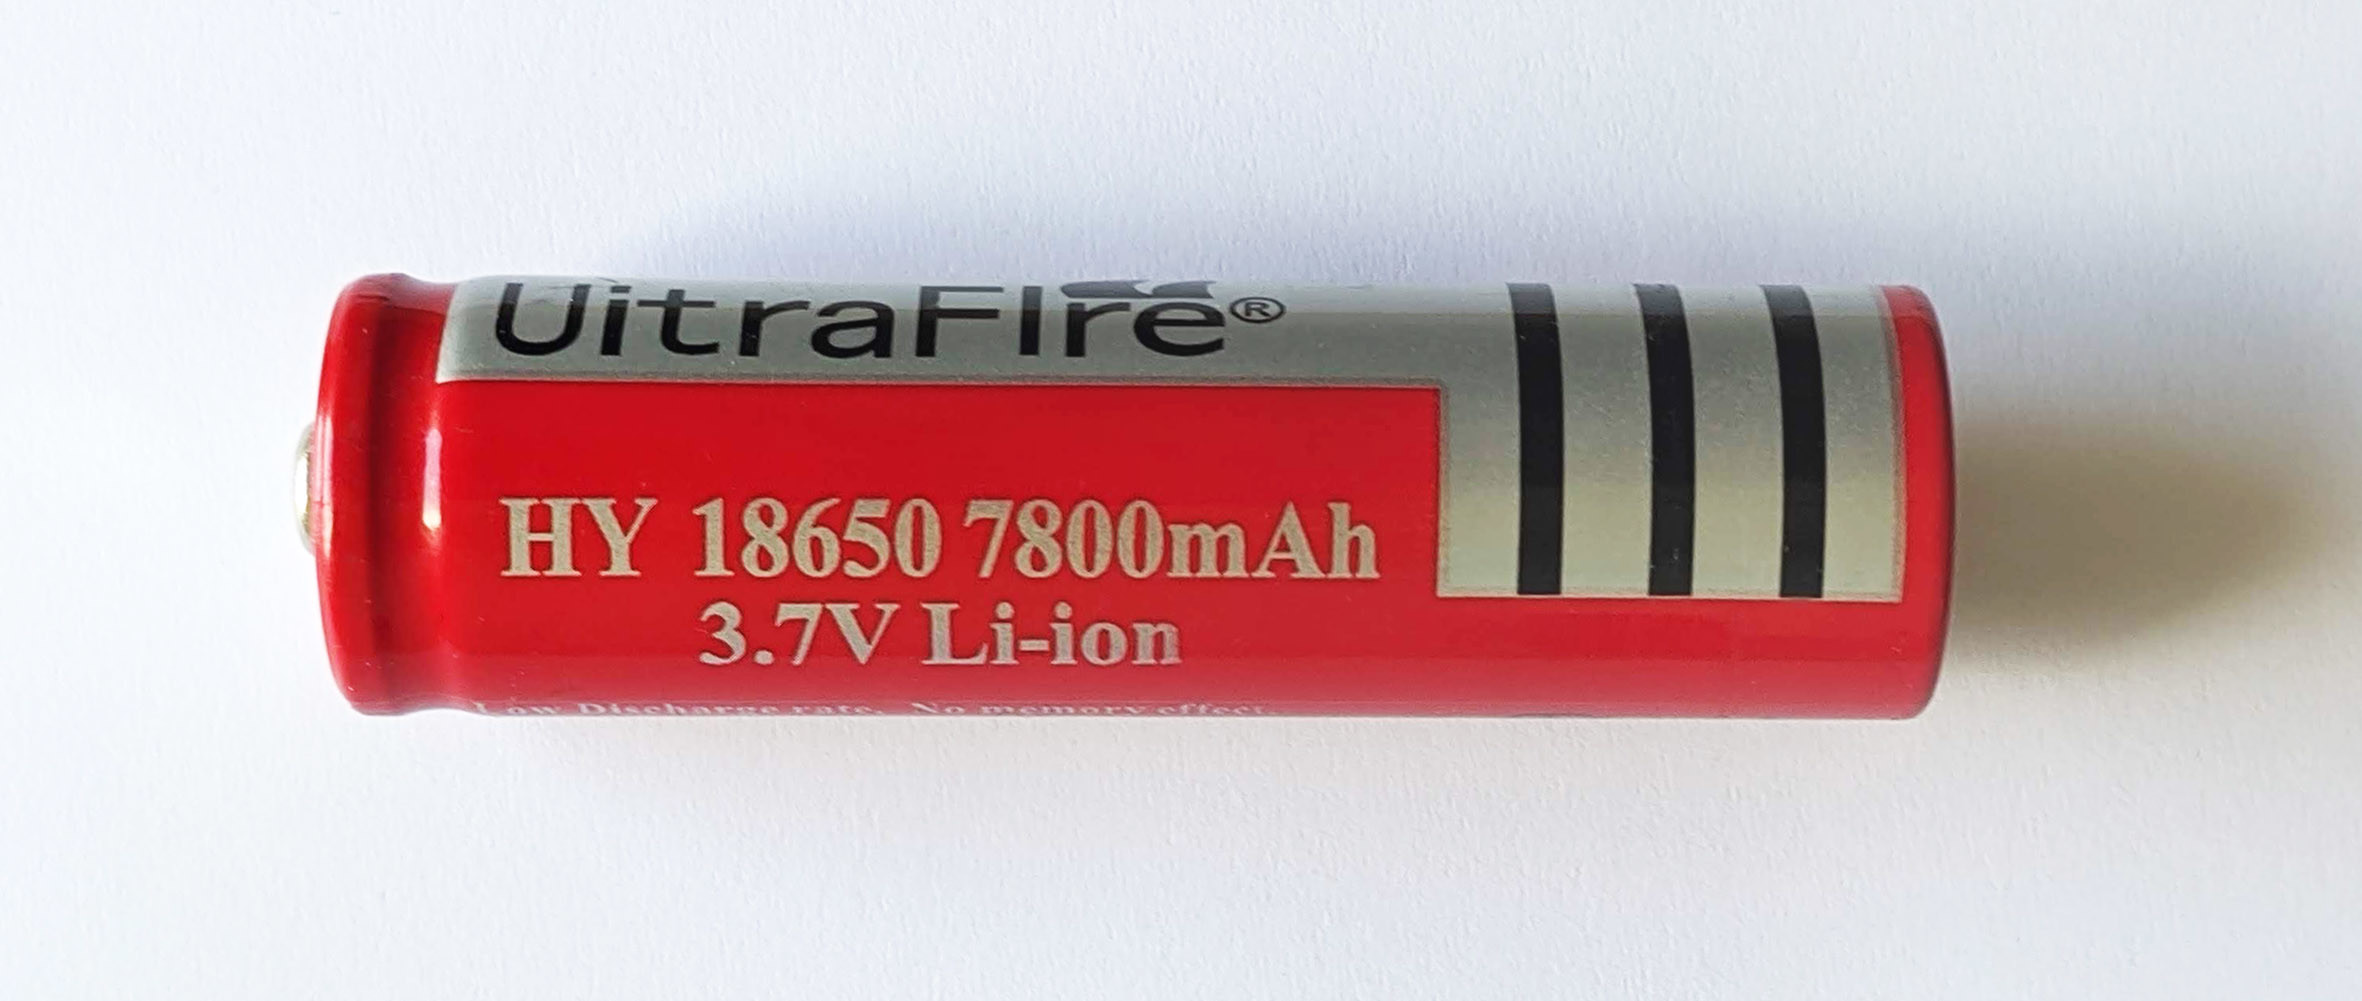 Typical lithium cell in 18650 format 